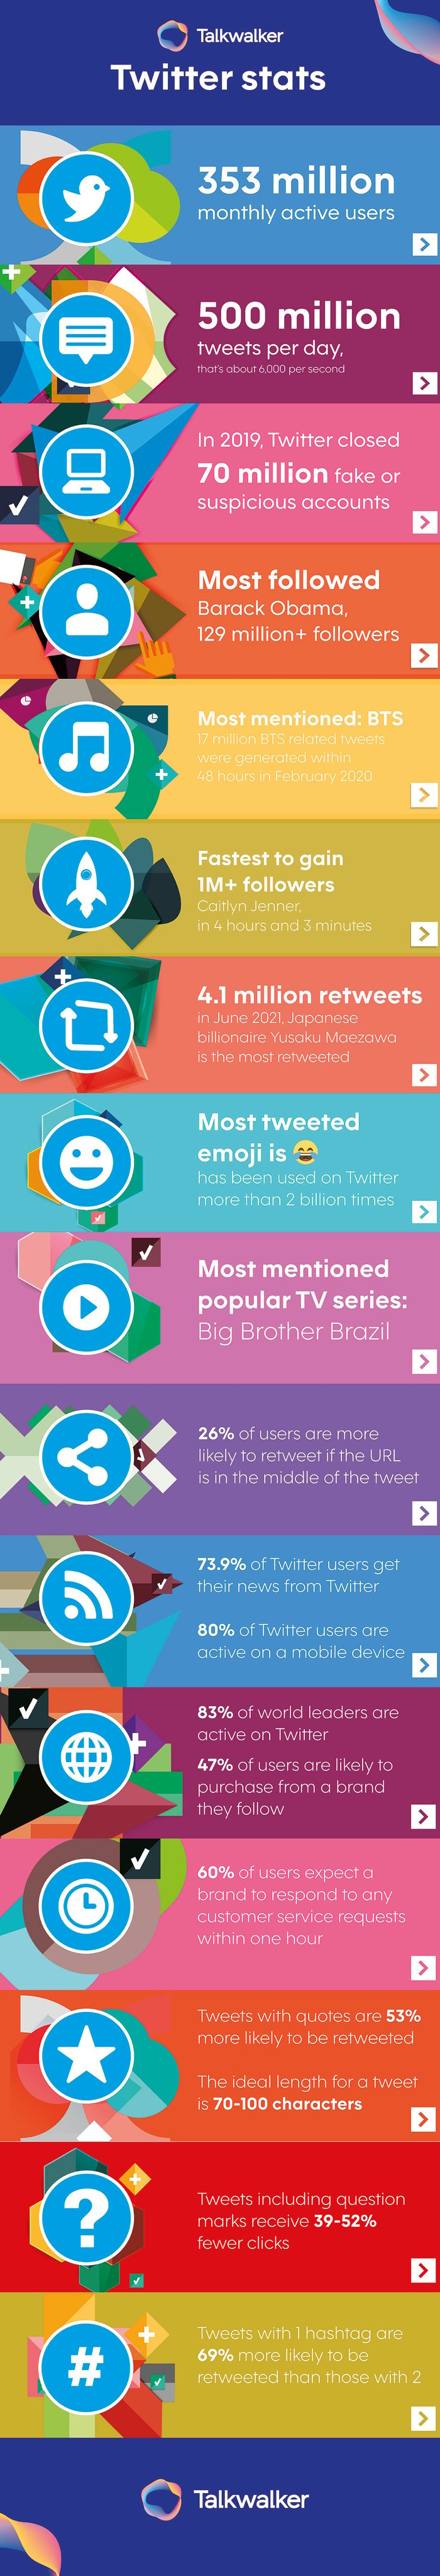 Infographic packed with 40Twitter statistics